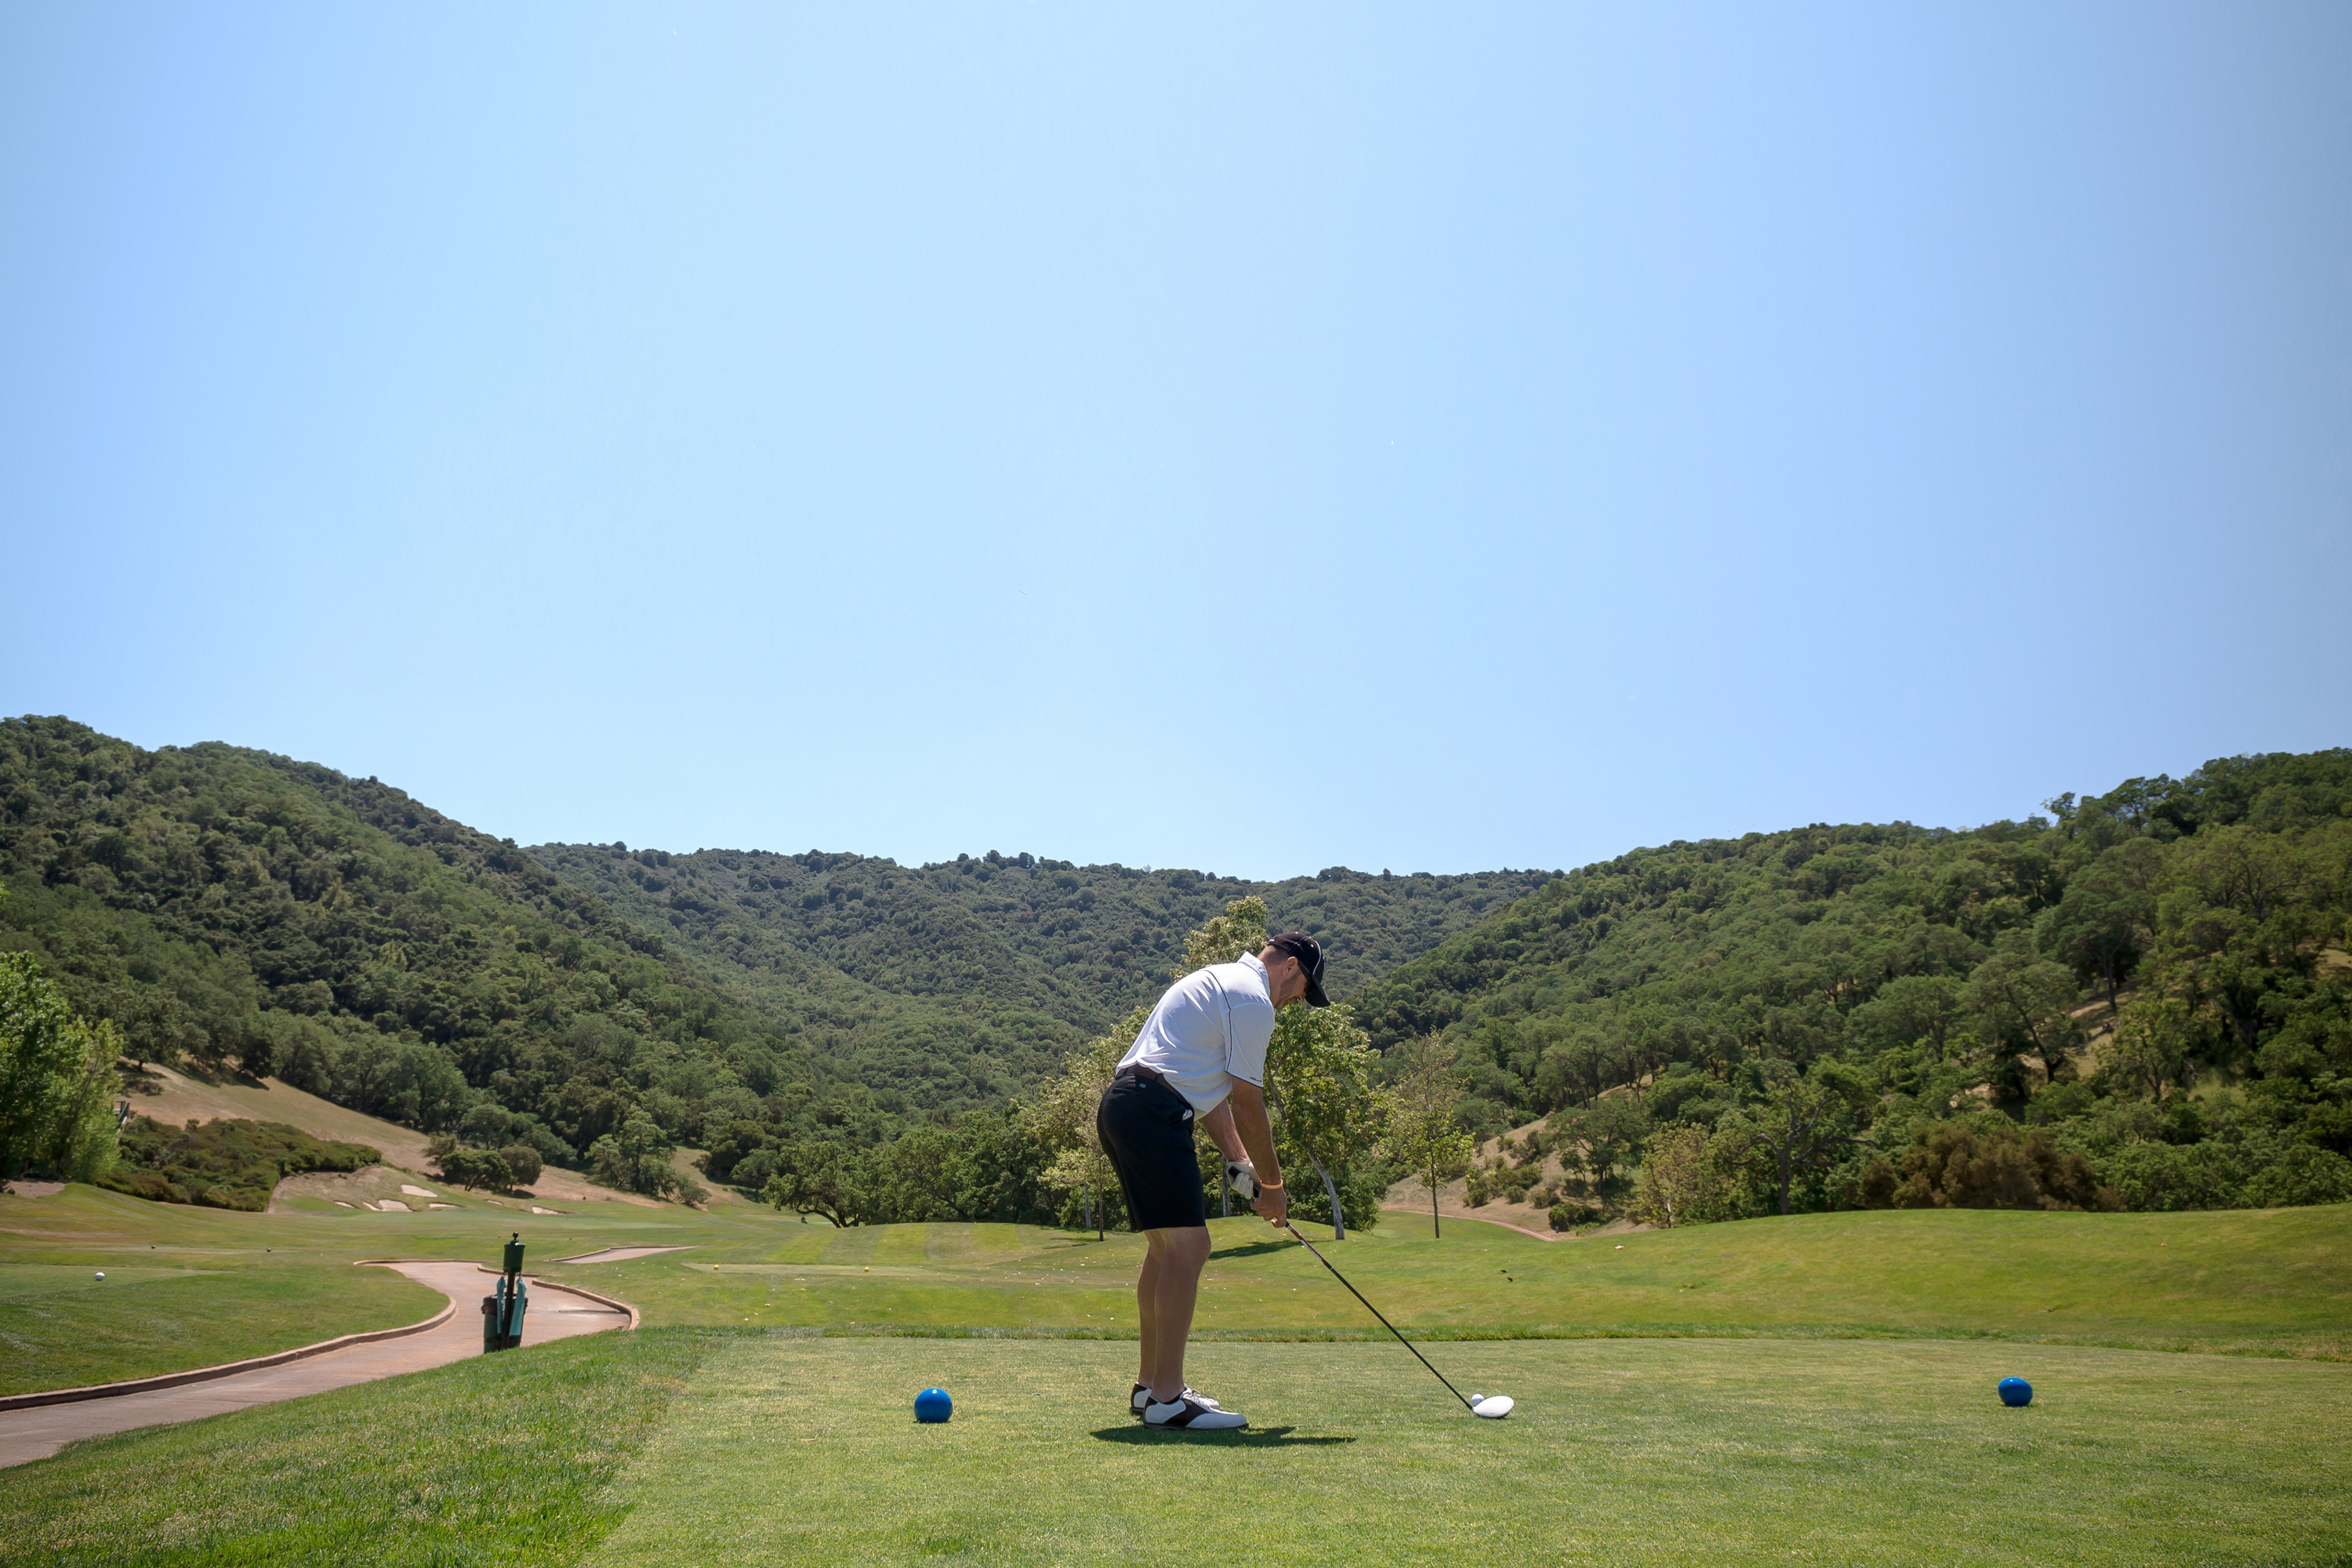 Man in a white shirt and black shorts golfing